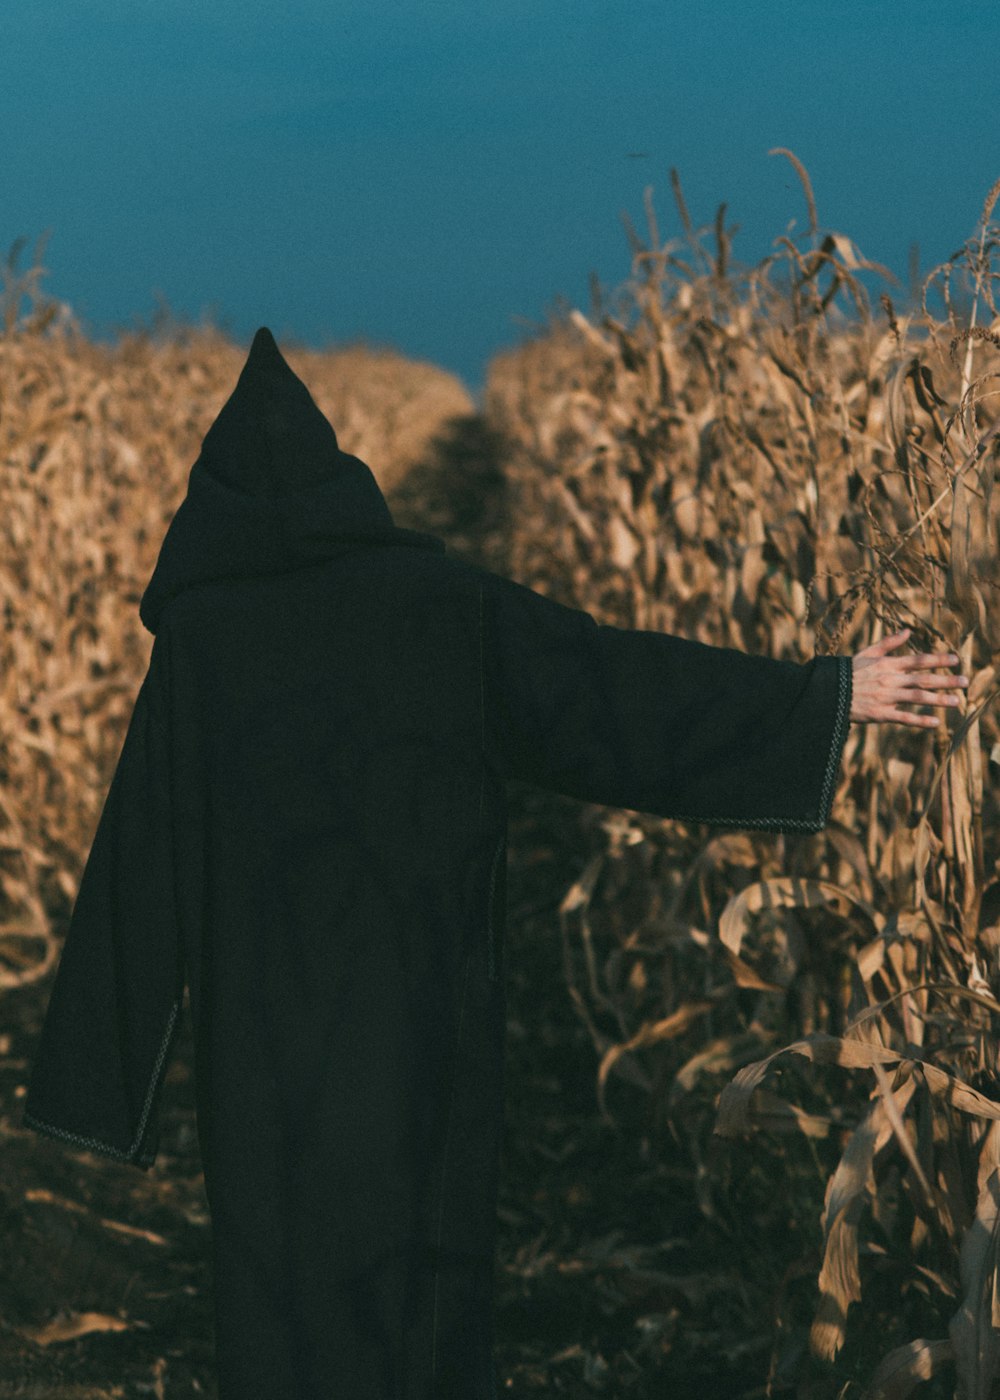 person wearing black coat standing in corn field during daytime